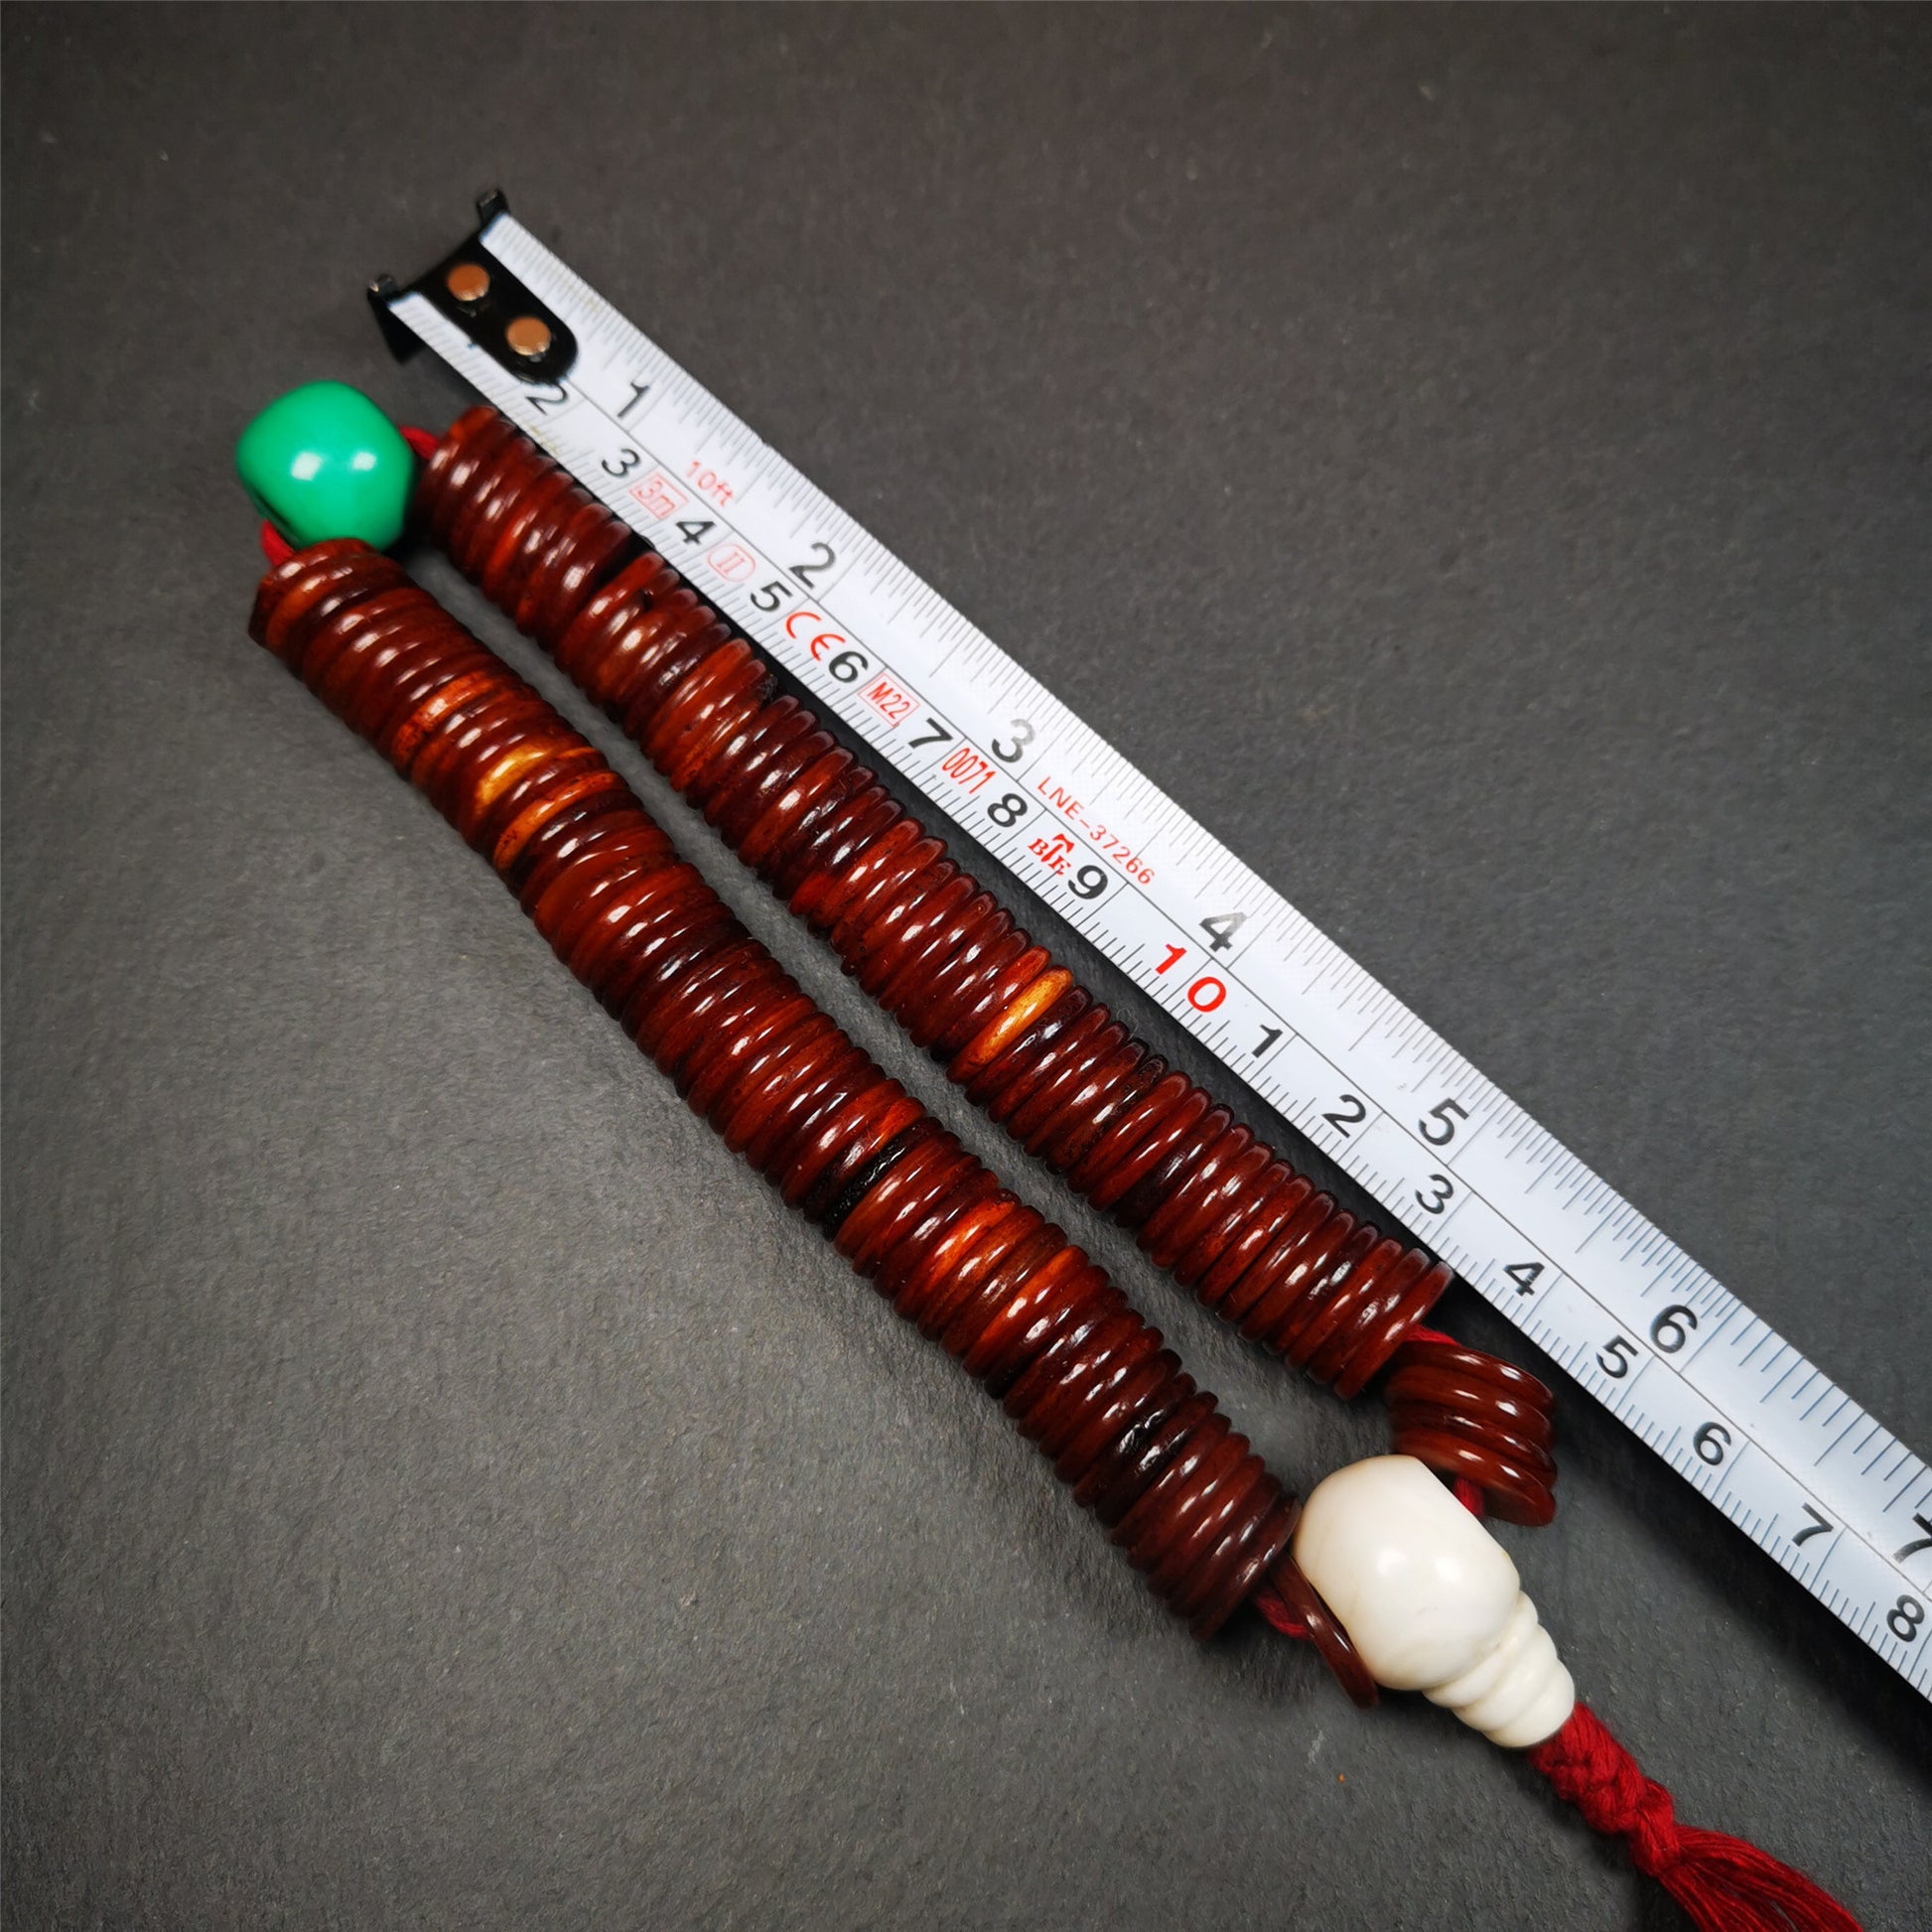 This bone carved mala beads is made by Tibetan craftsmen and come from Hepo Town, Baiyu County,about 30 years Old. It has 108 flat shape beads,1 turquoise spacer bead,and 1 shell guru bead,all hand carved.